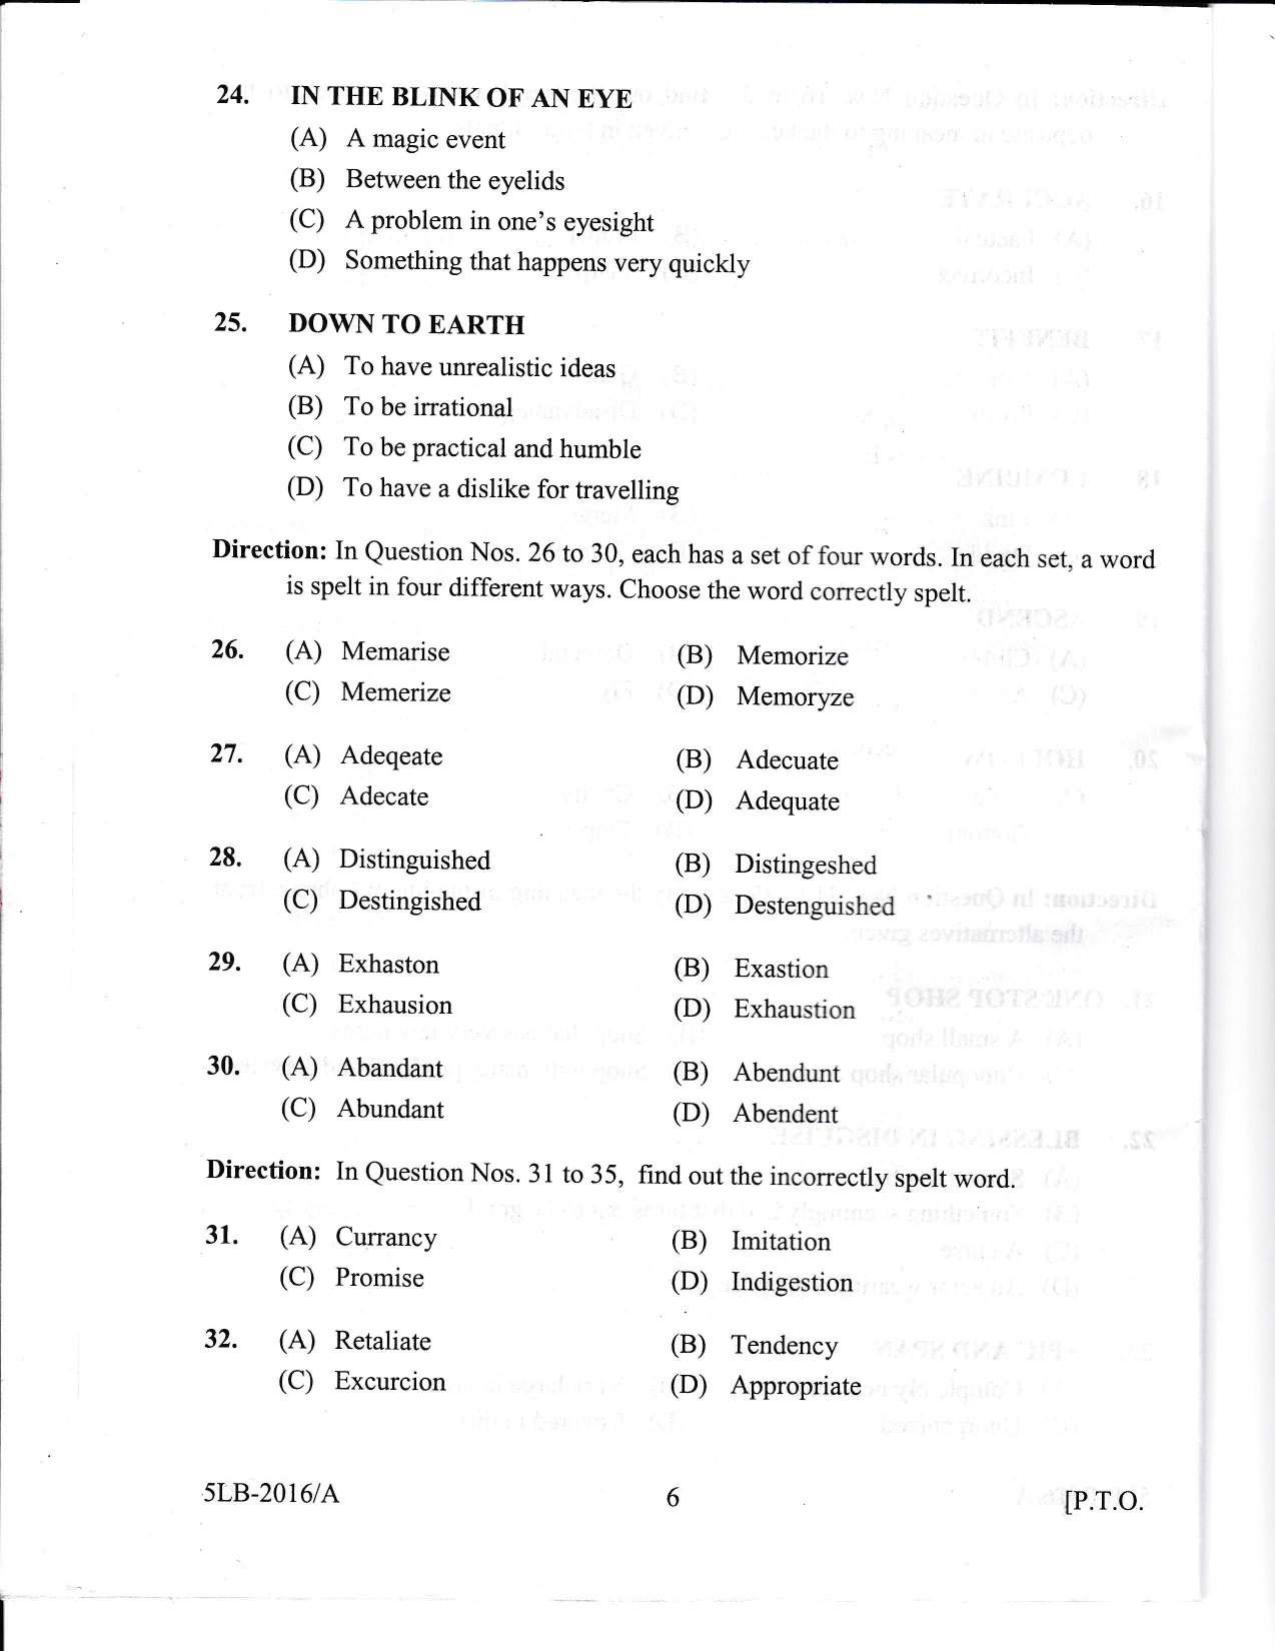 KLEE 5 Year LLB Exam 2016 Question Paper - Page 6